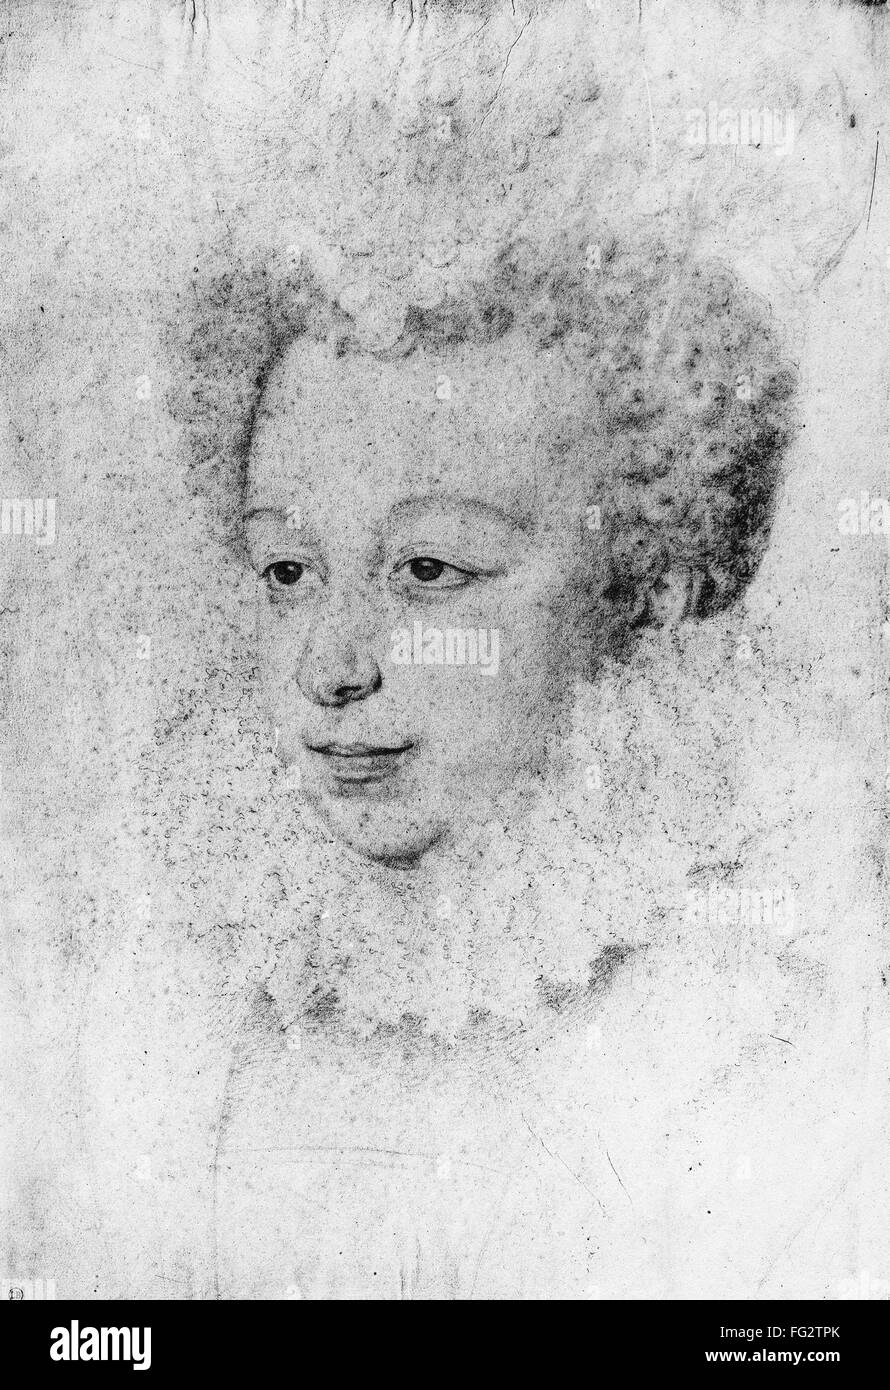 MARGARET OF VALOIS /n(1553-1615). Queen of King Henry IV of France. Contemporary Renaissance drawing by G. Dumonstier. Stock Photo